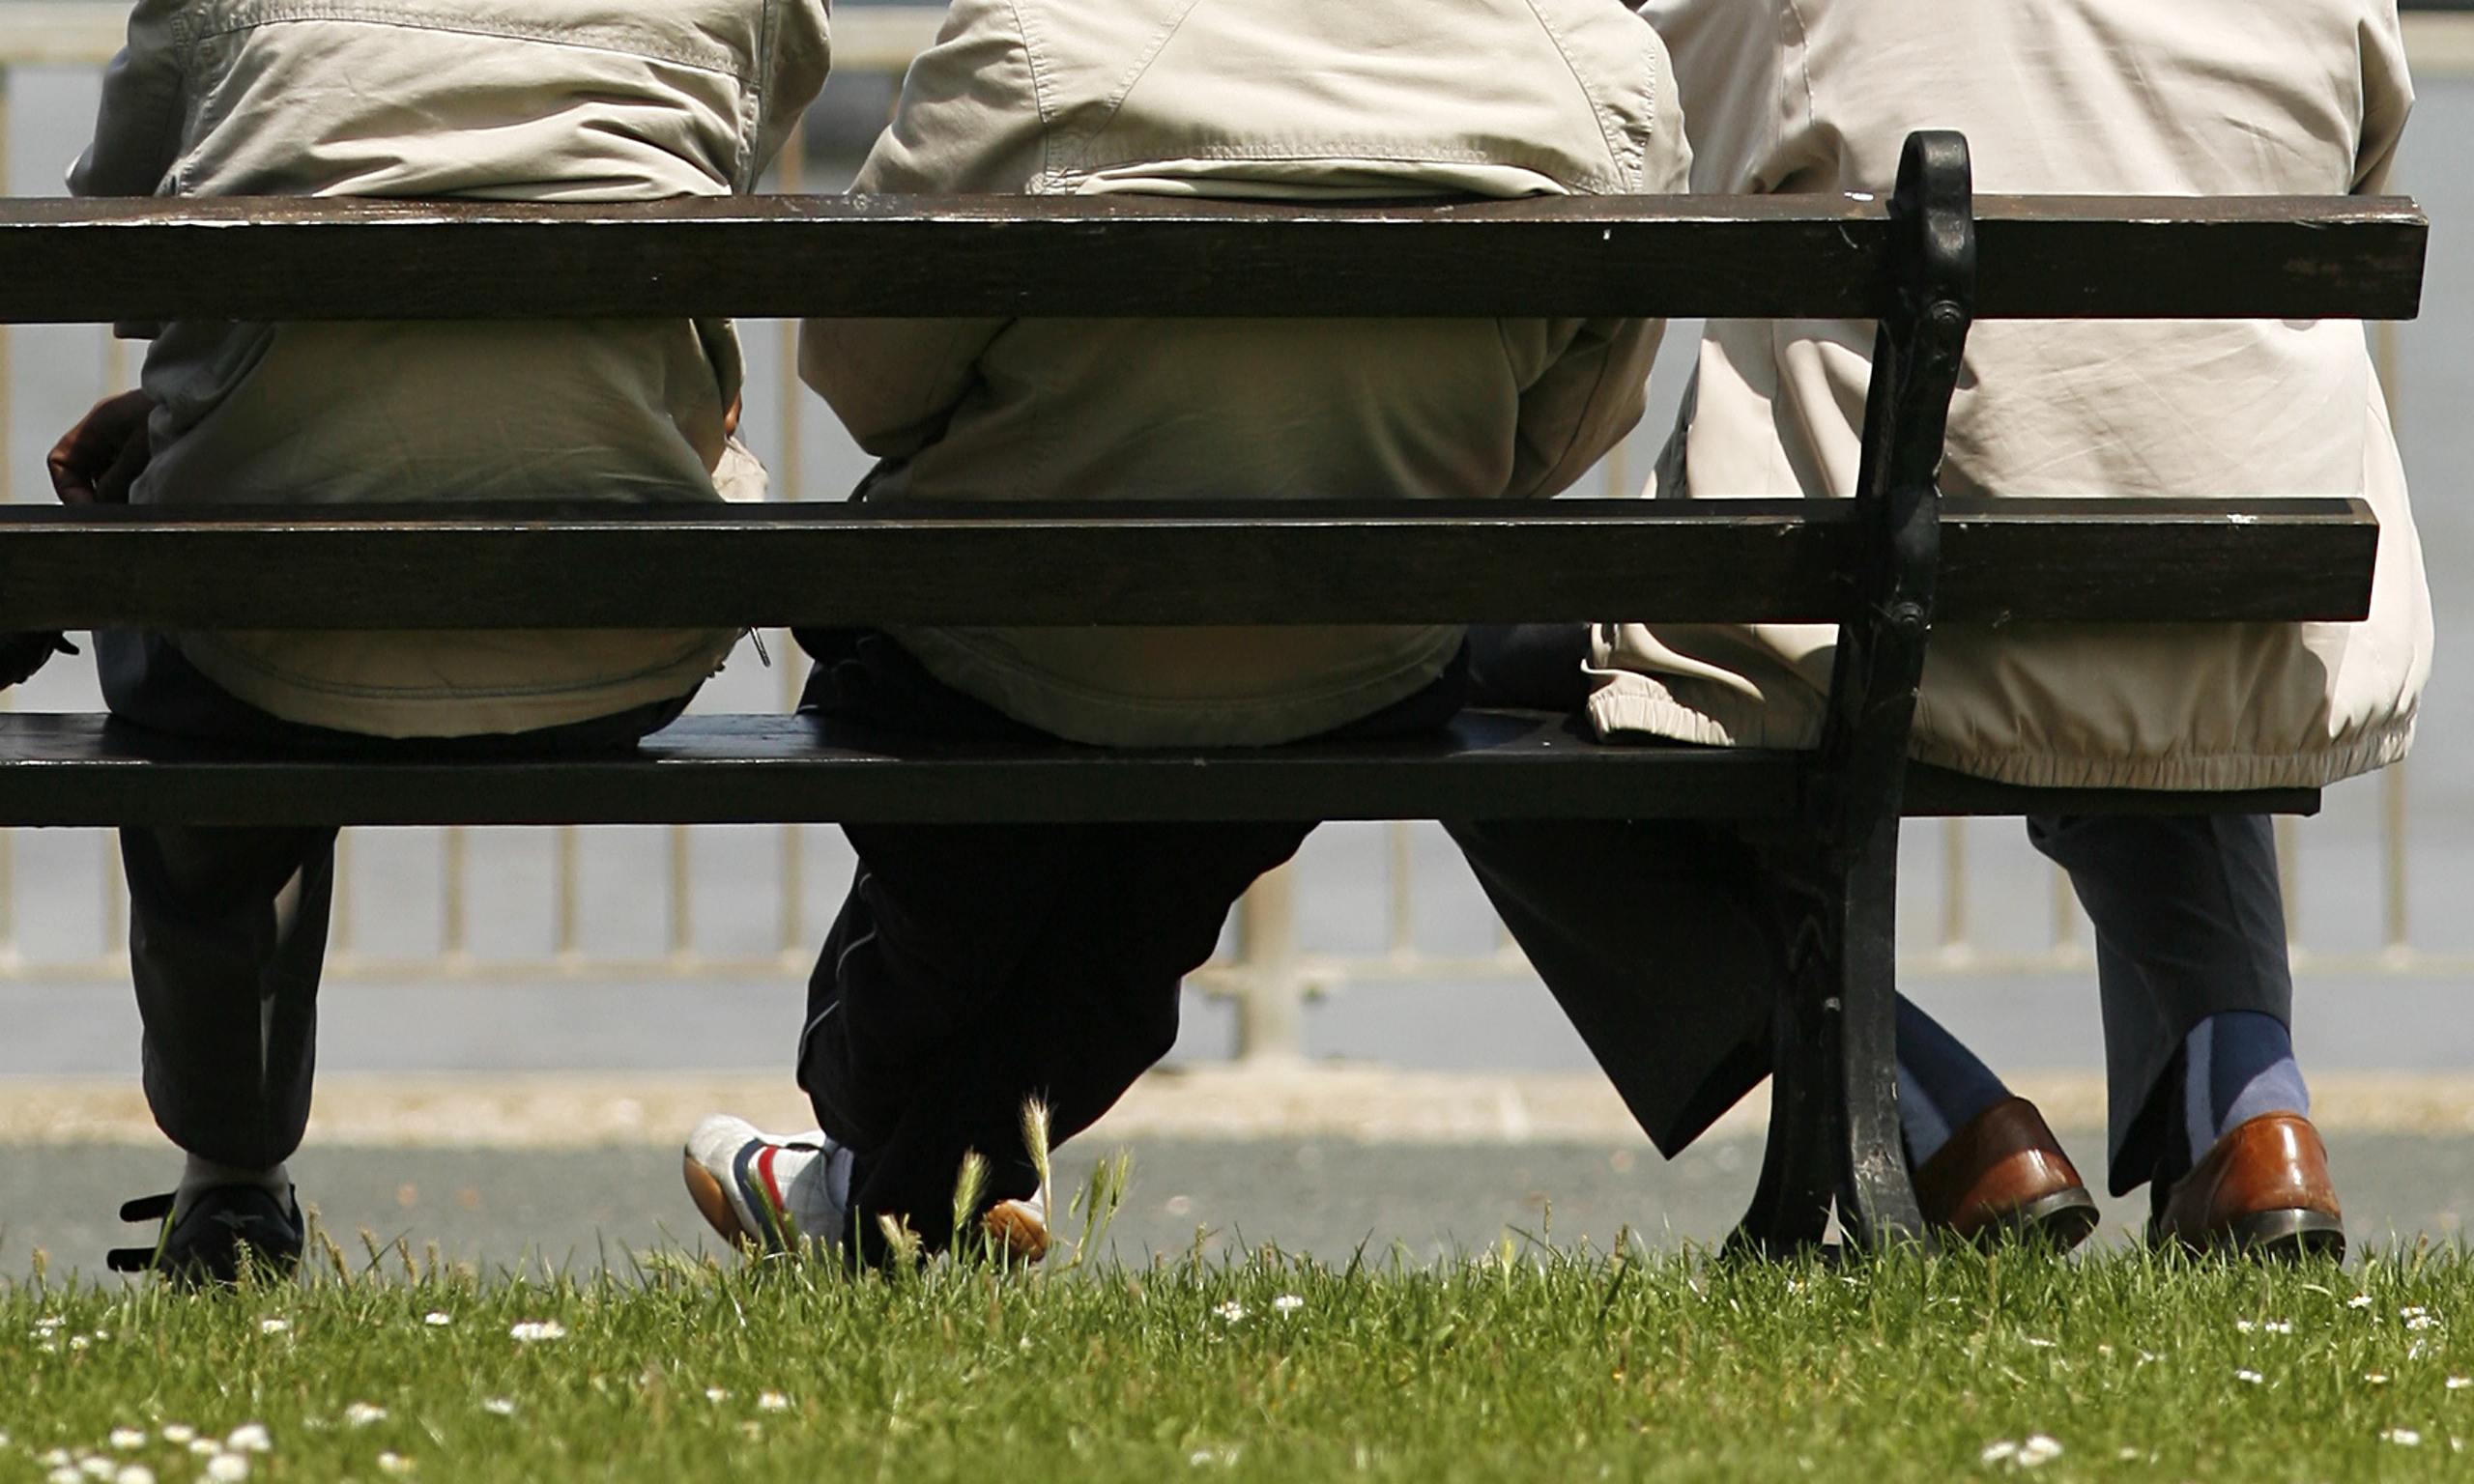 Dover Benches Designed To Be Uncomfortable Council Bosses Admit Uk